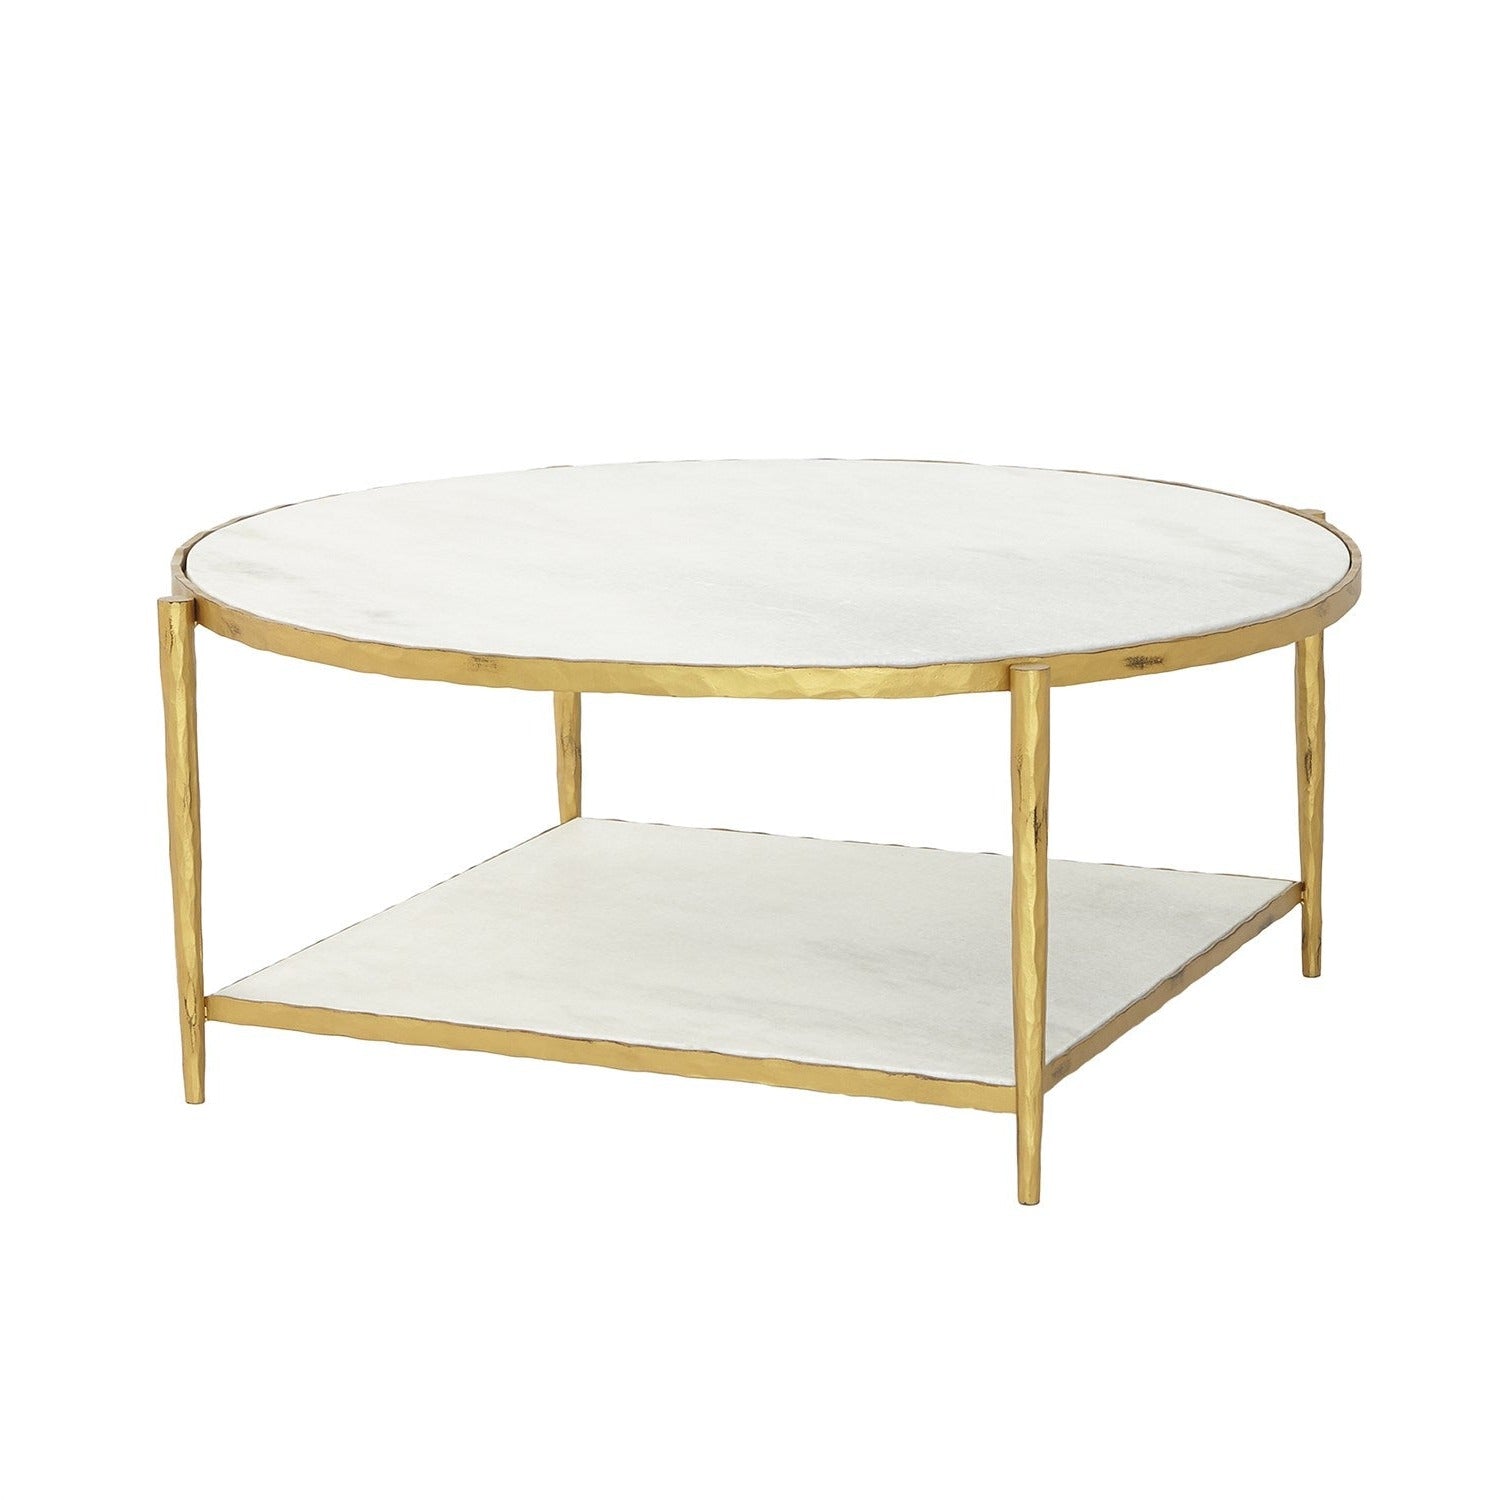 global views circle square cocktail table gold white marble full